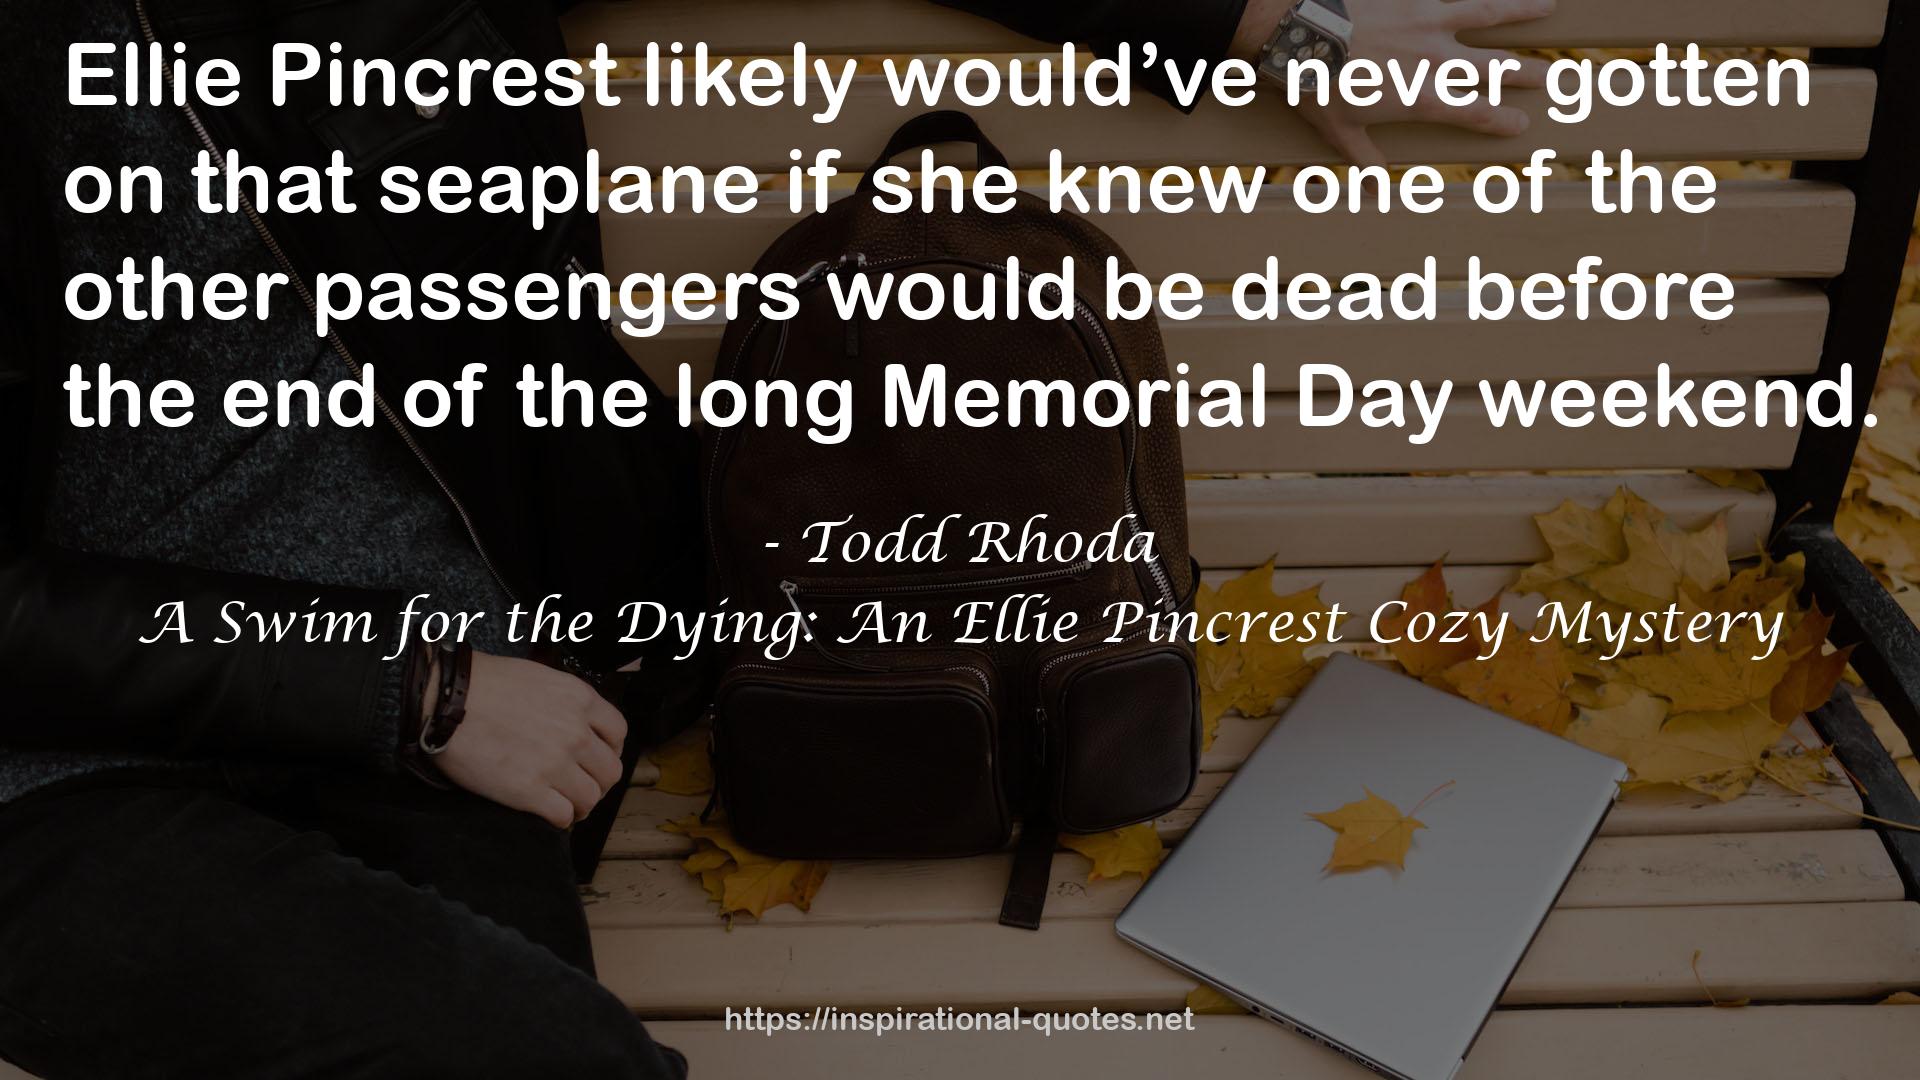 A Swim for the Dying: An Ellie Pincrest Cozy Mystery QUOTES